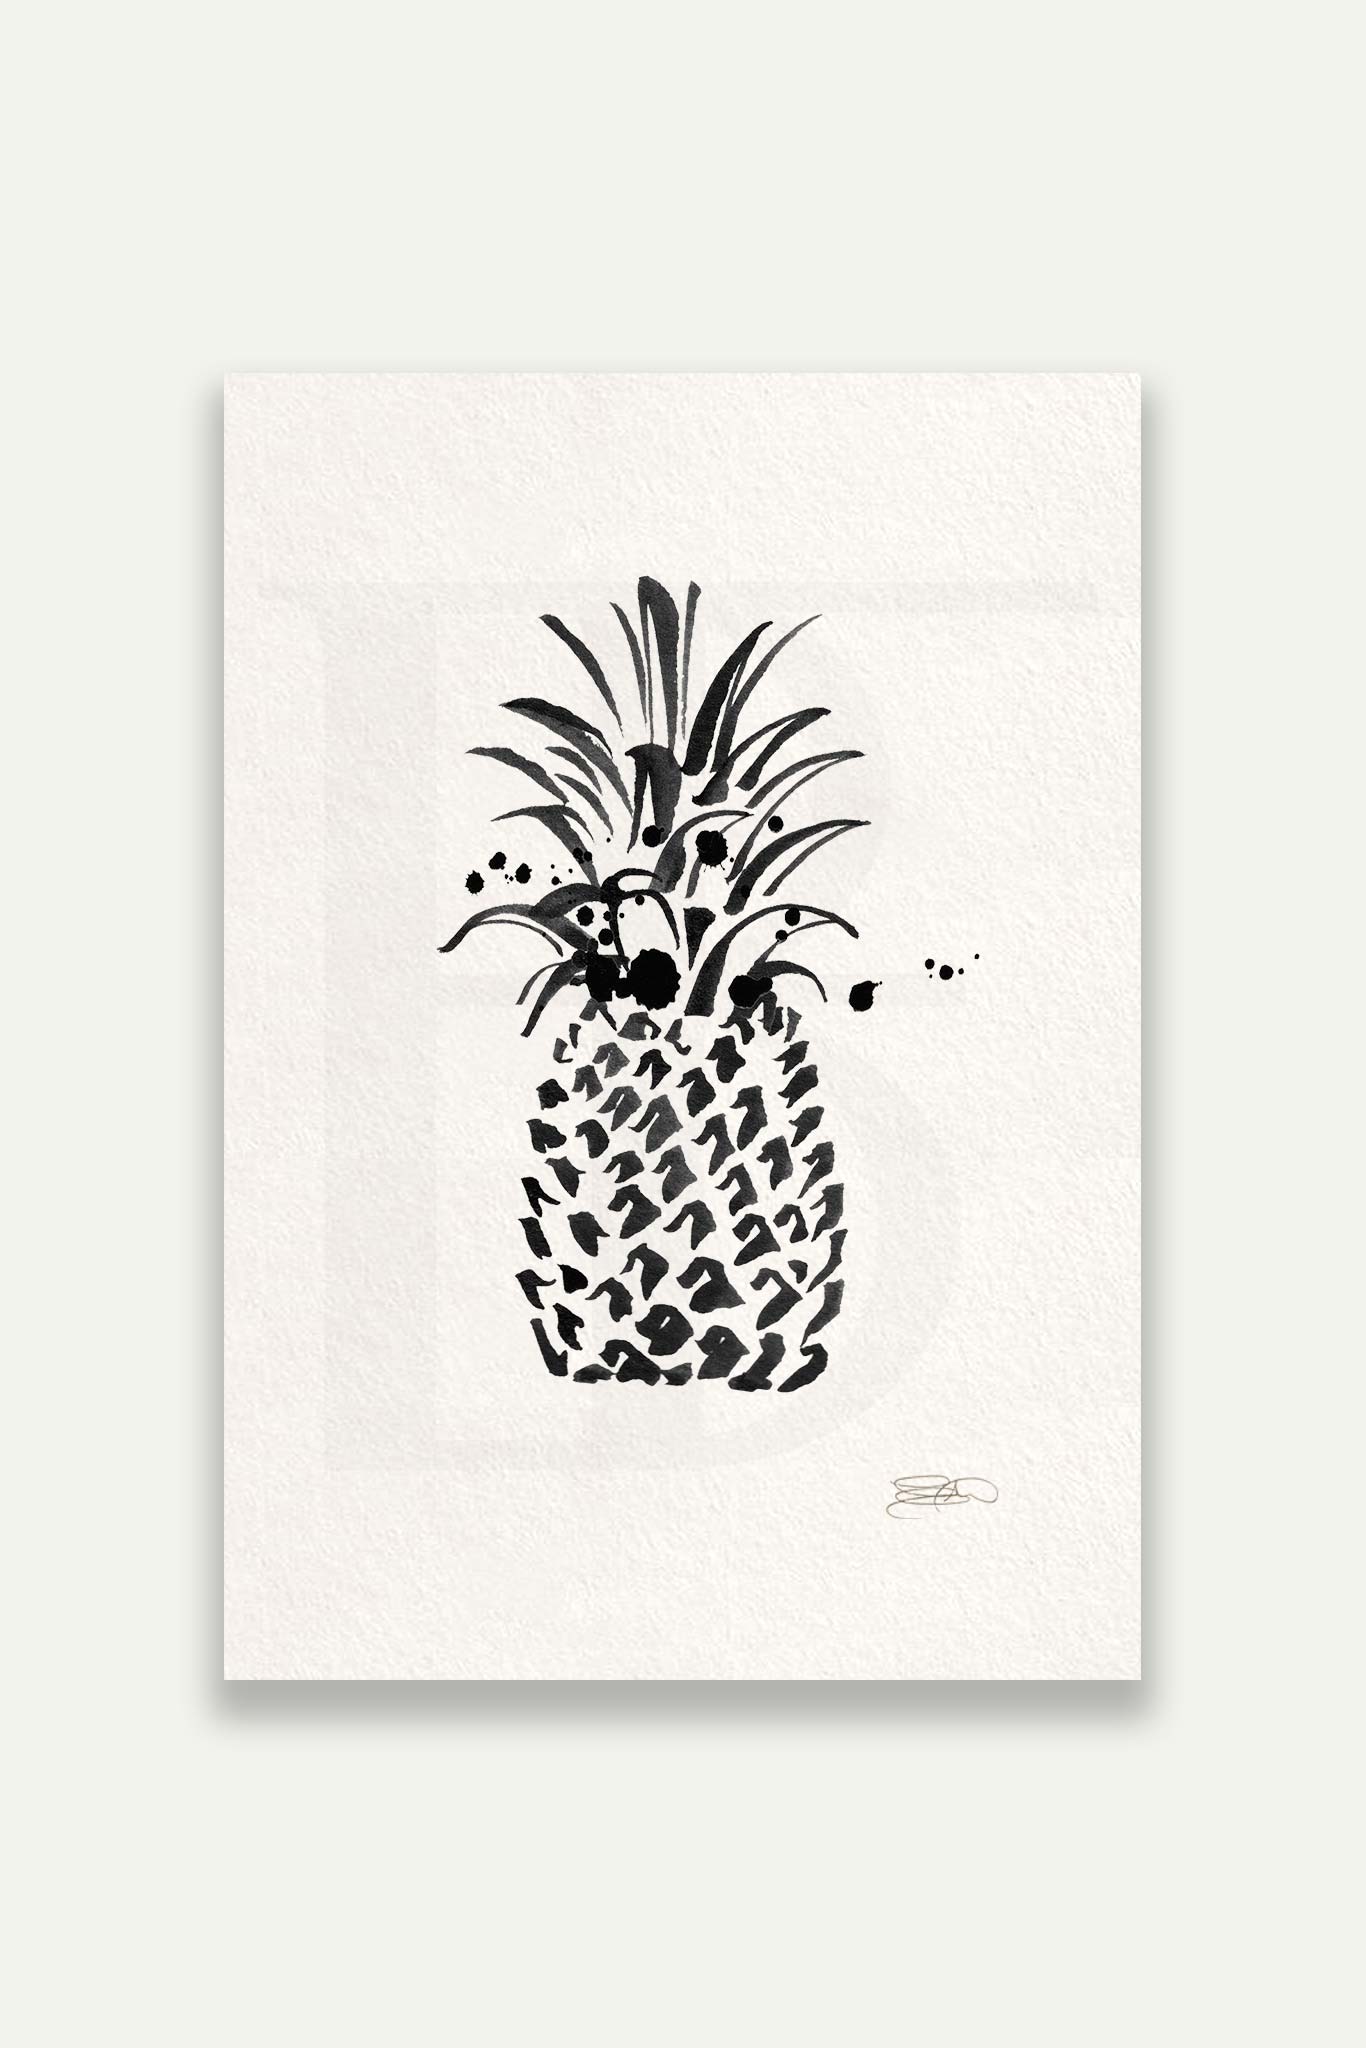 Pineapple, by Fable